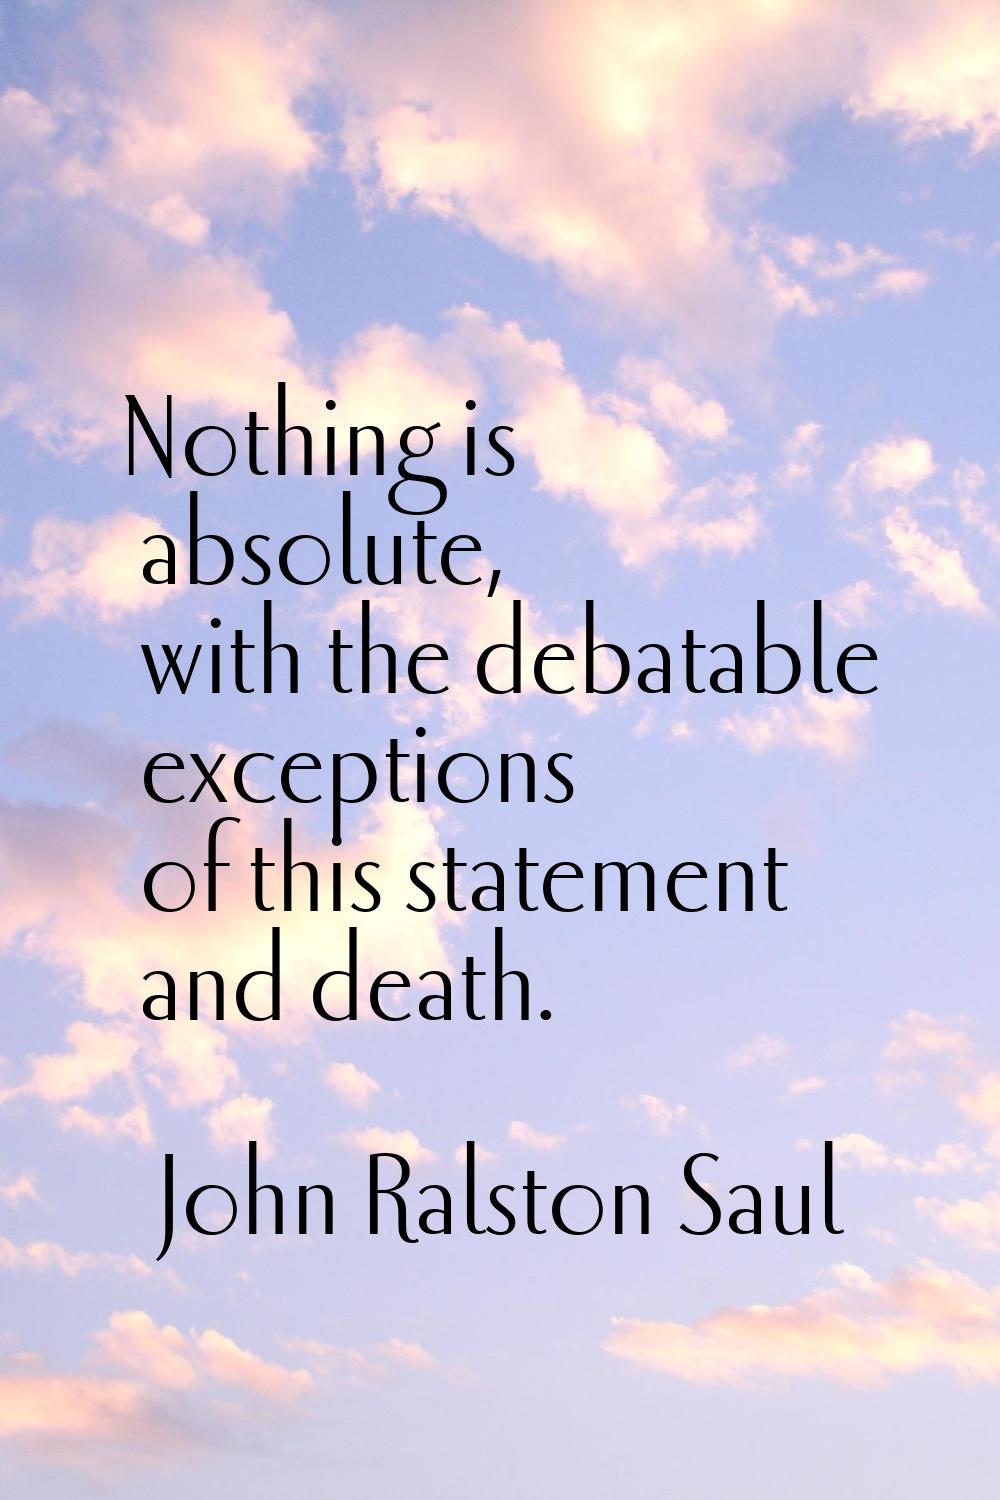 Nothing is absolute, with the debatable exceptions of this statement and death.